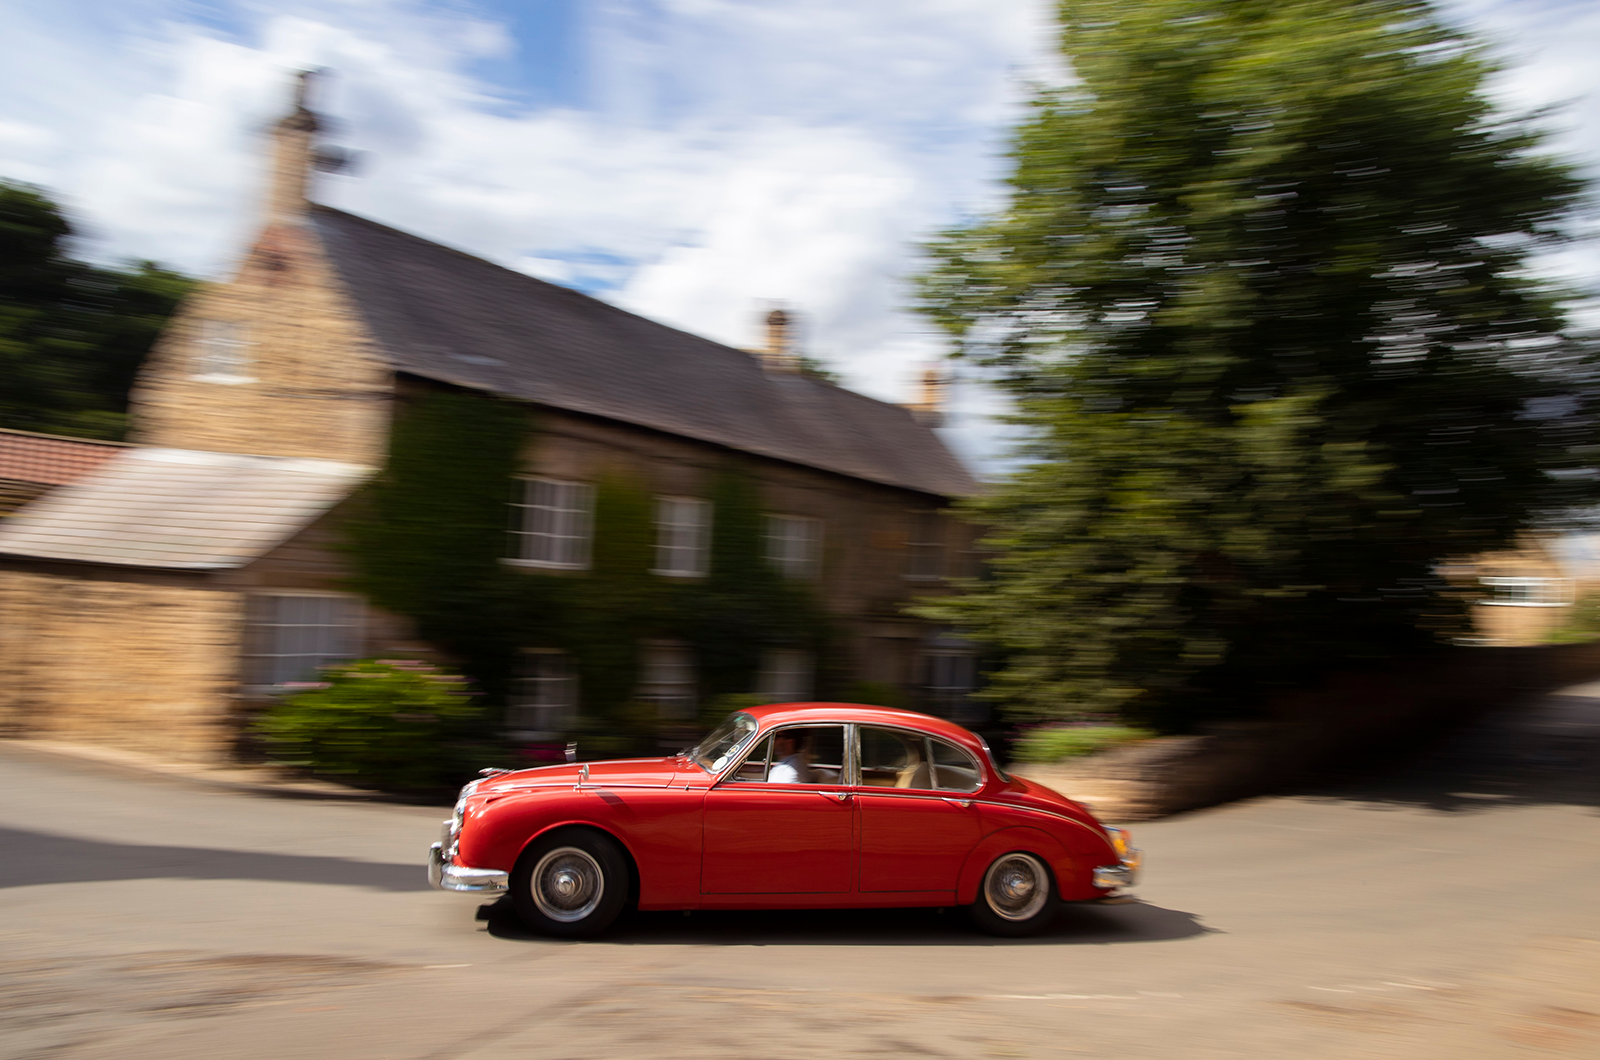 Classic & Sports Car – Want to get out in your classic? Check out this new tour